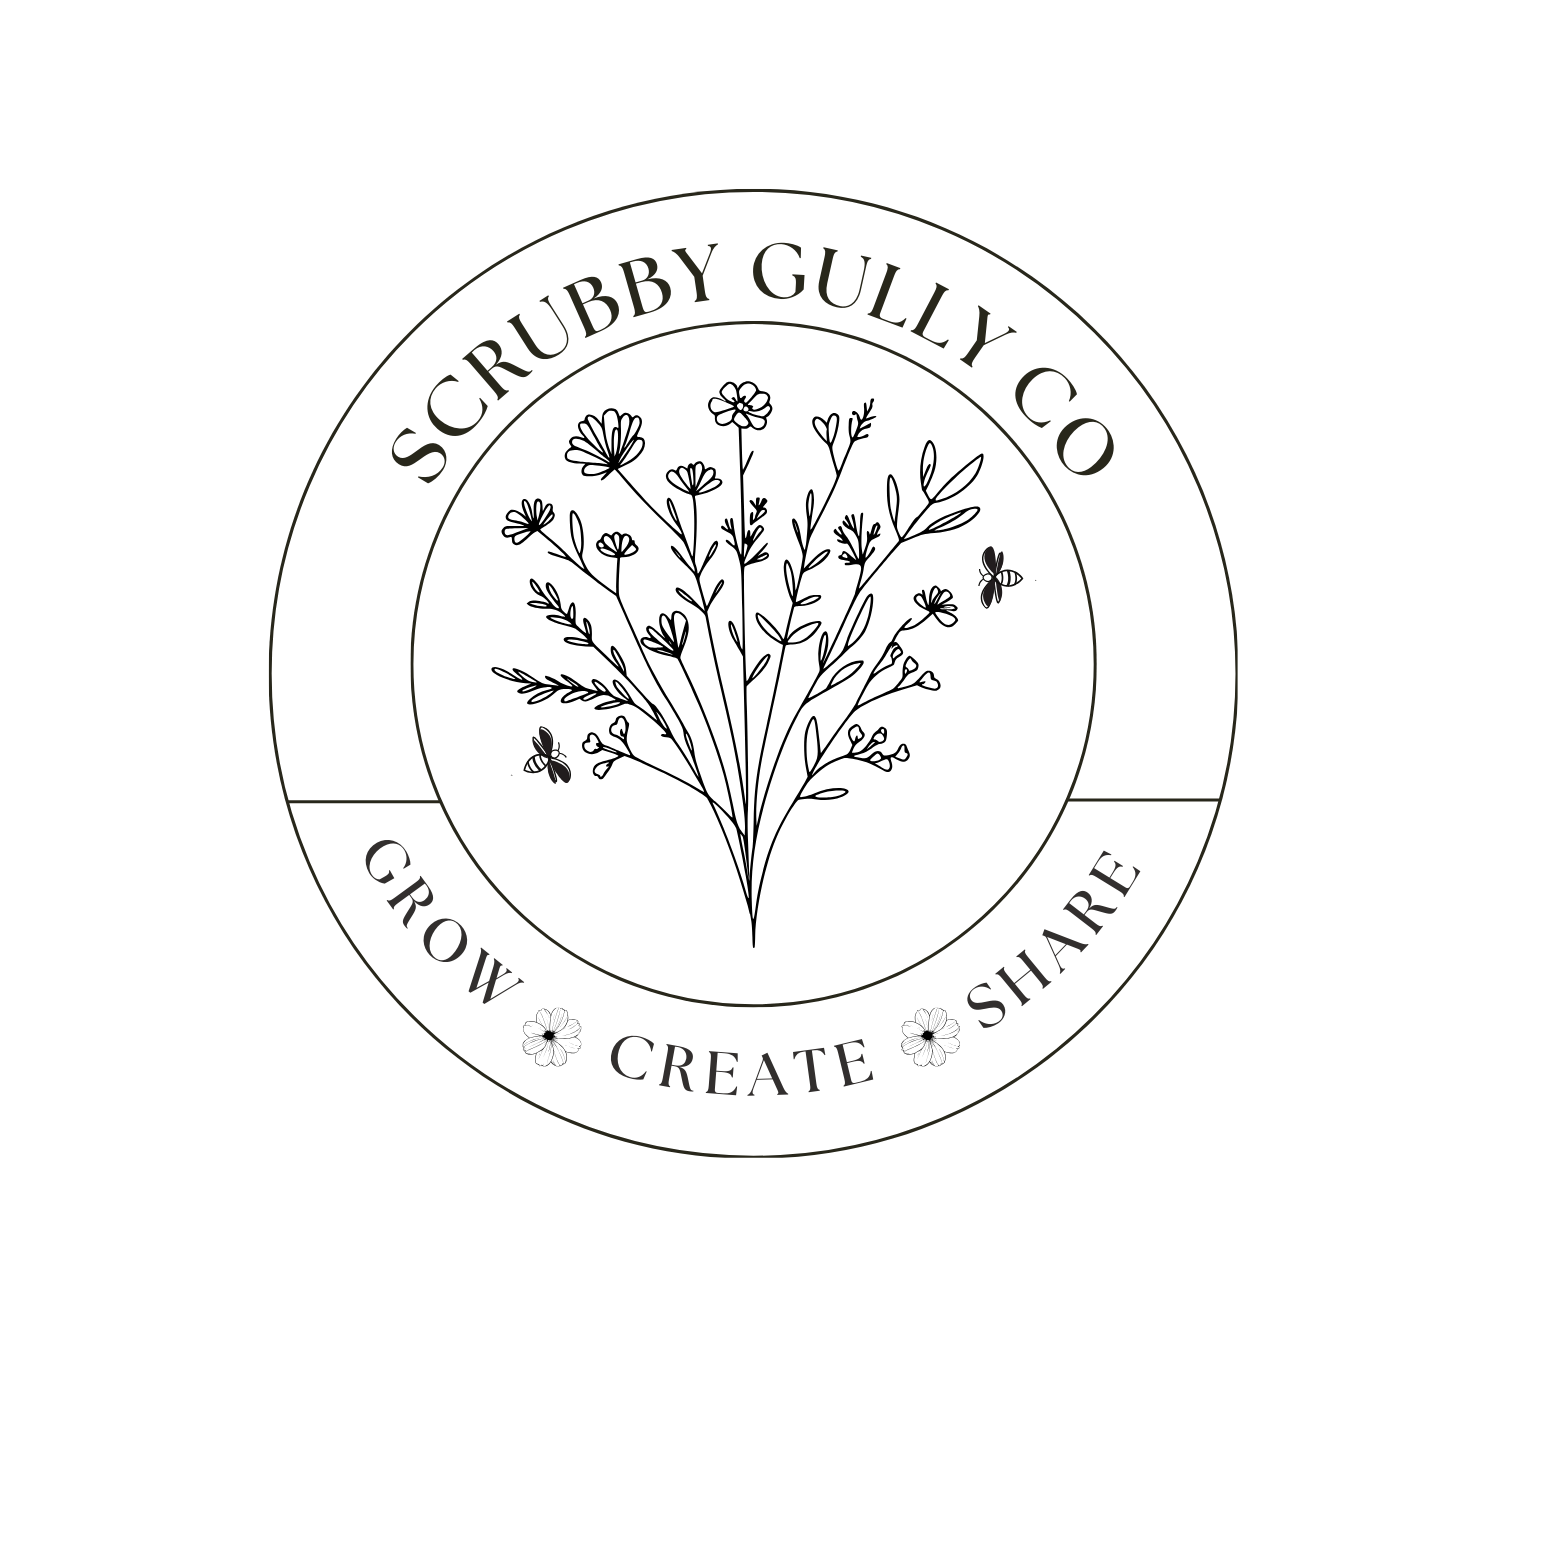 About Scrubby Gully